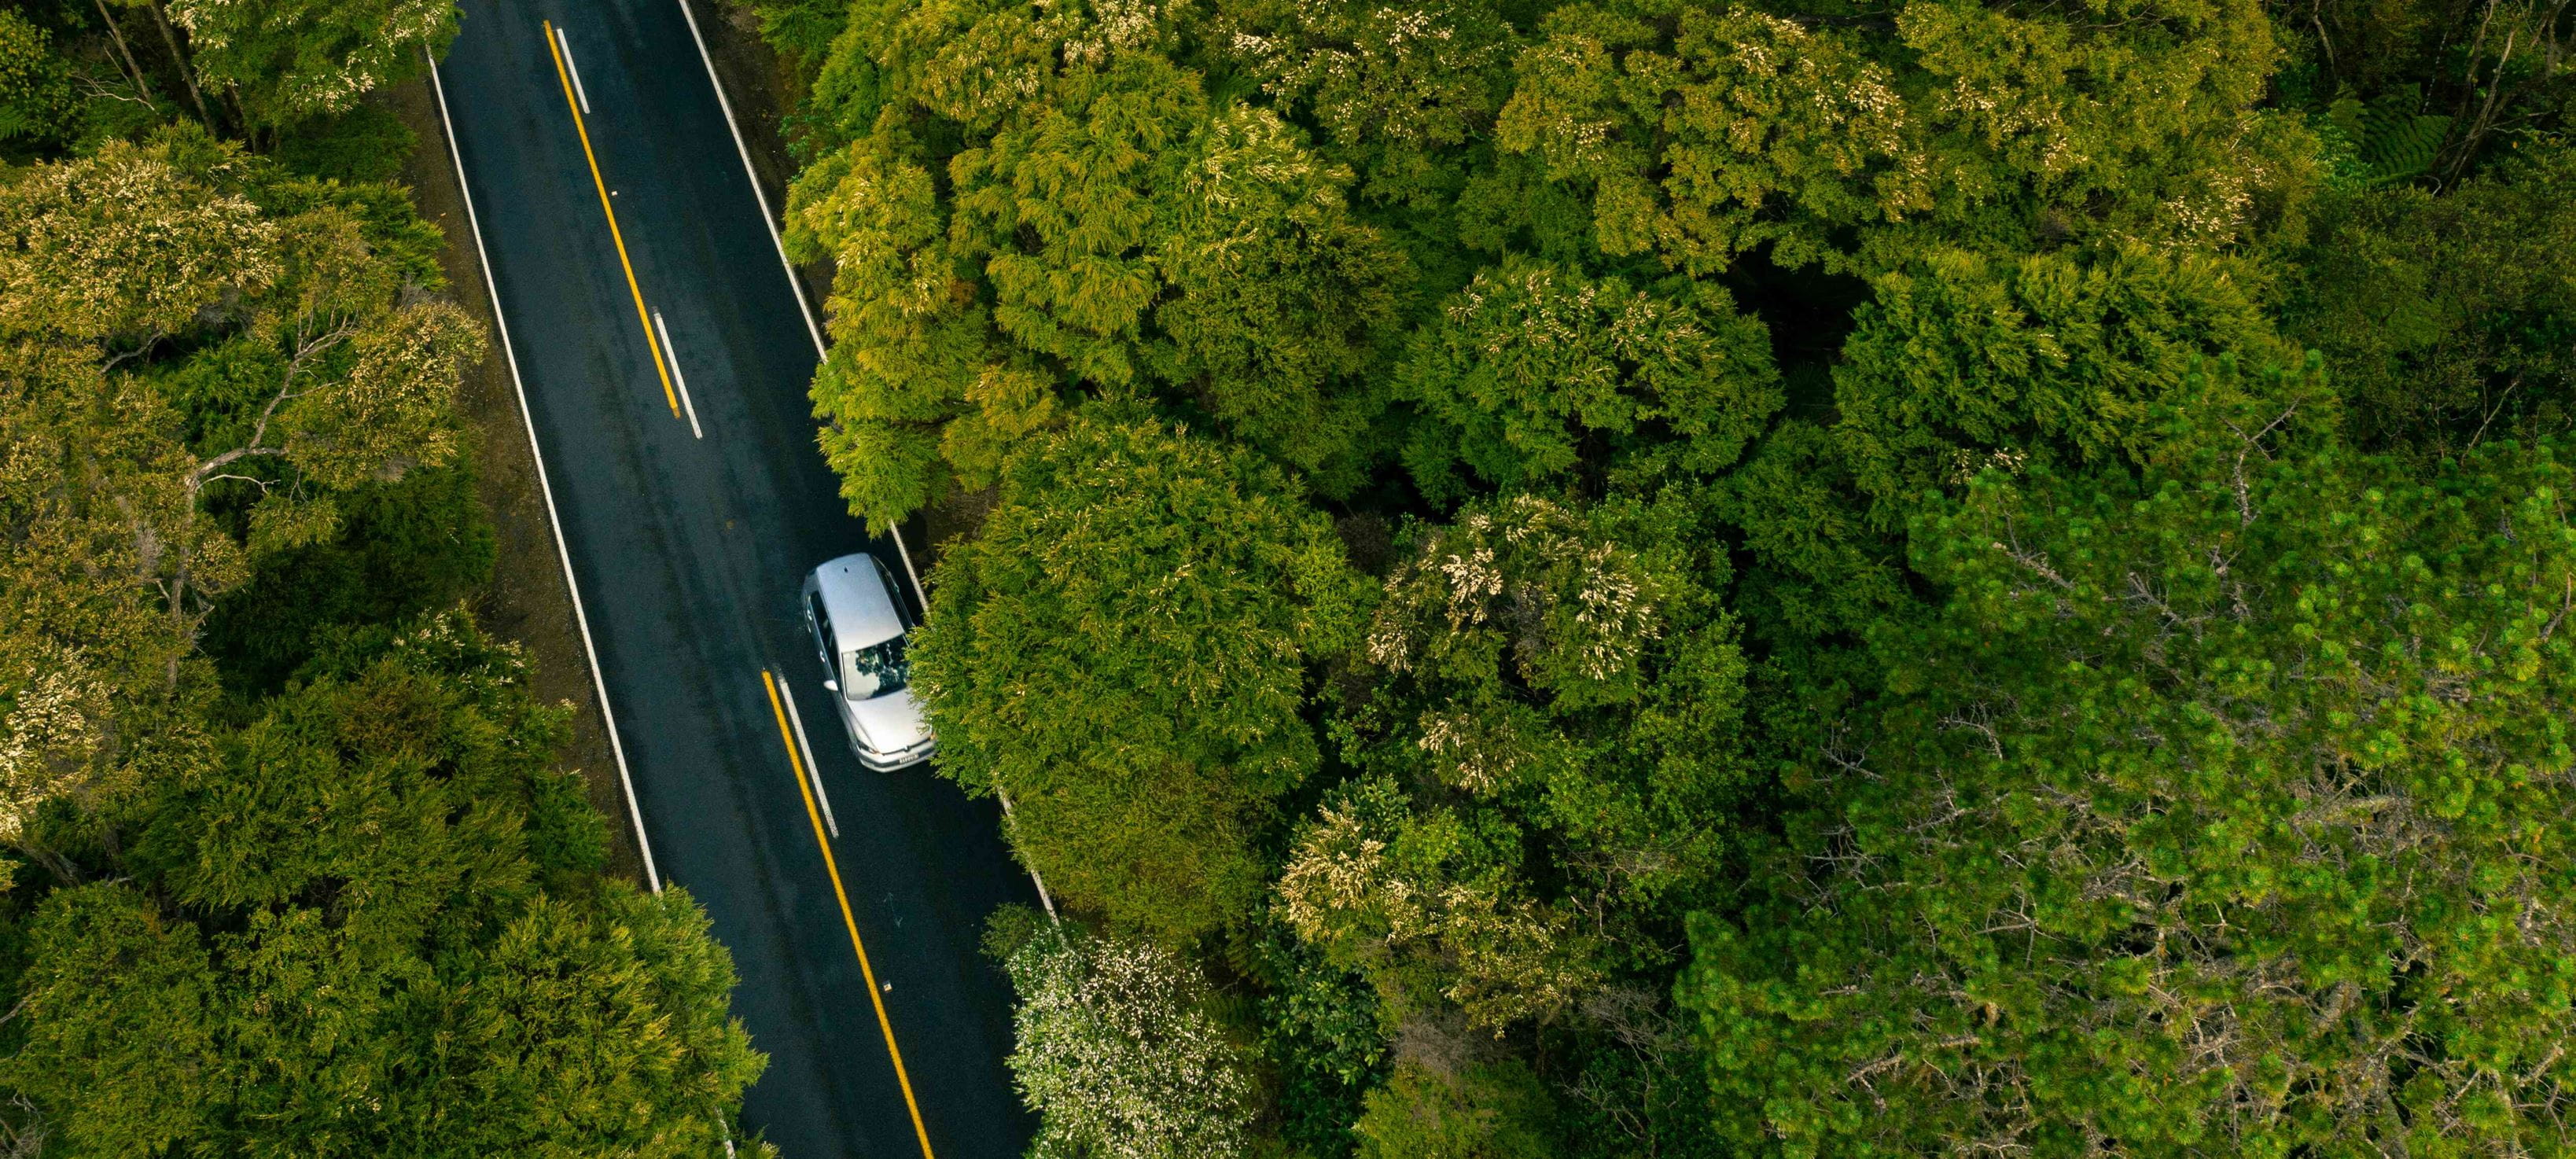 Aerial shot of a grey car on the road surrounded by green forest